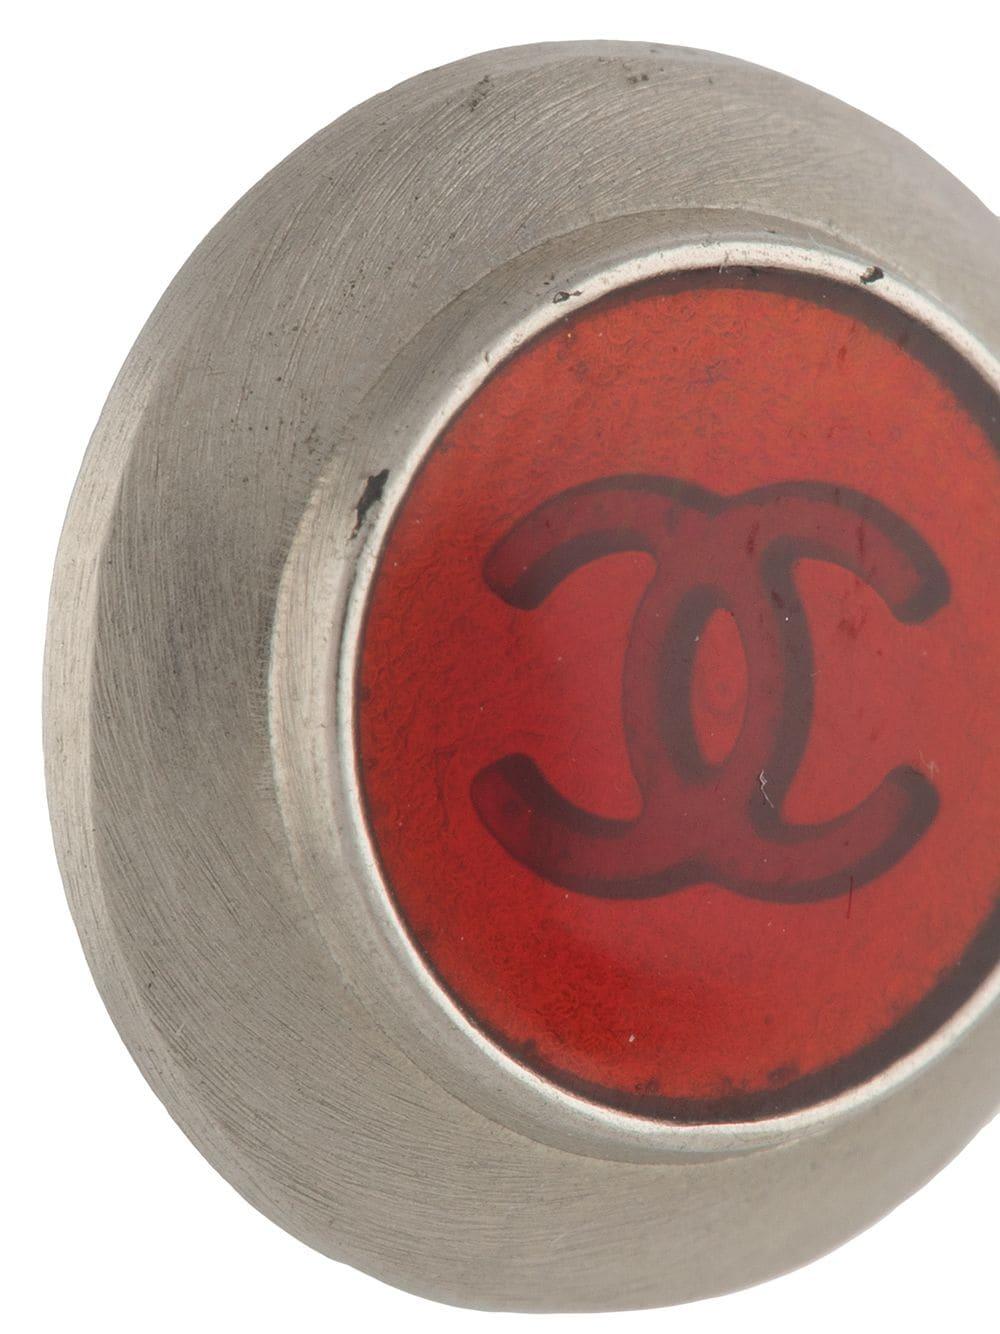 1998s Chanel red earrings featuring  a palladium outline, round logo shape and a logo back plaque.
Diameter: 0.6in (1.5cm)
In excellent vintage condition. Made in France. 
 We guarantee you will receive this gorgeous item as described and showed on